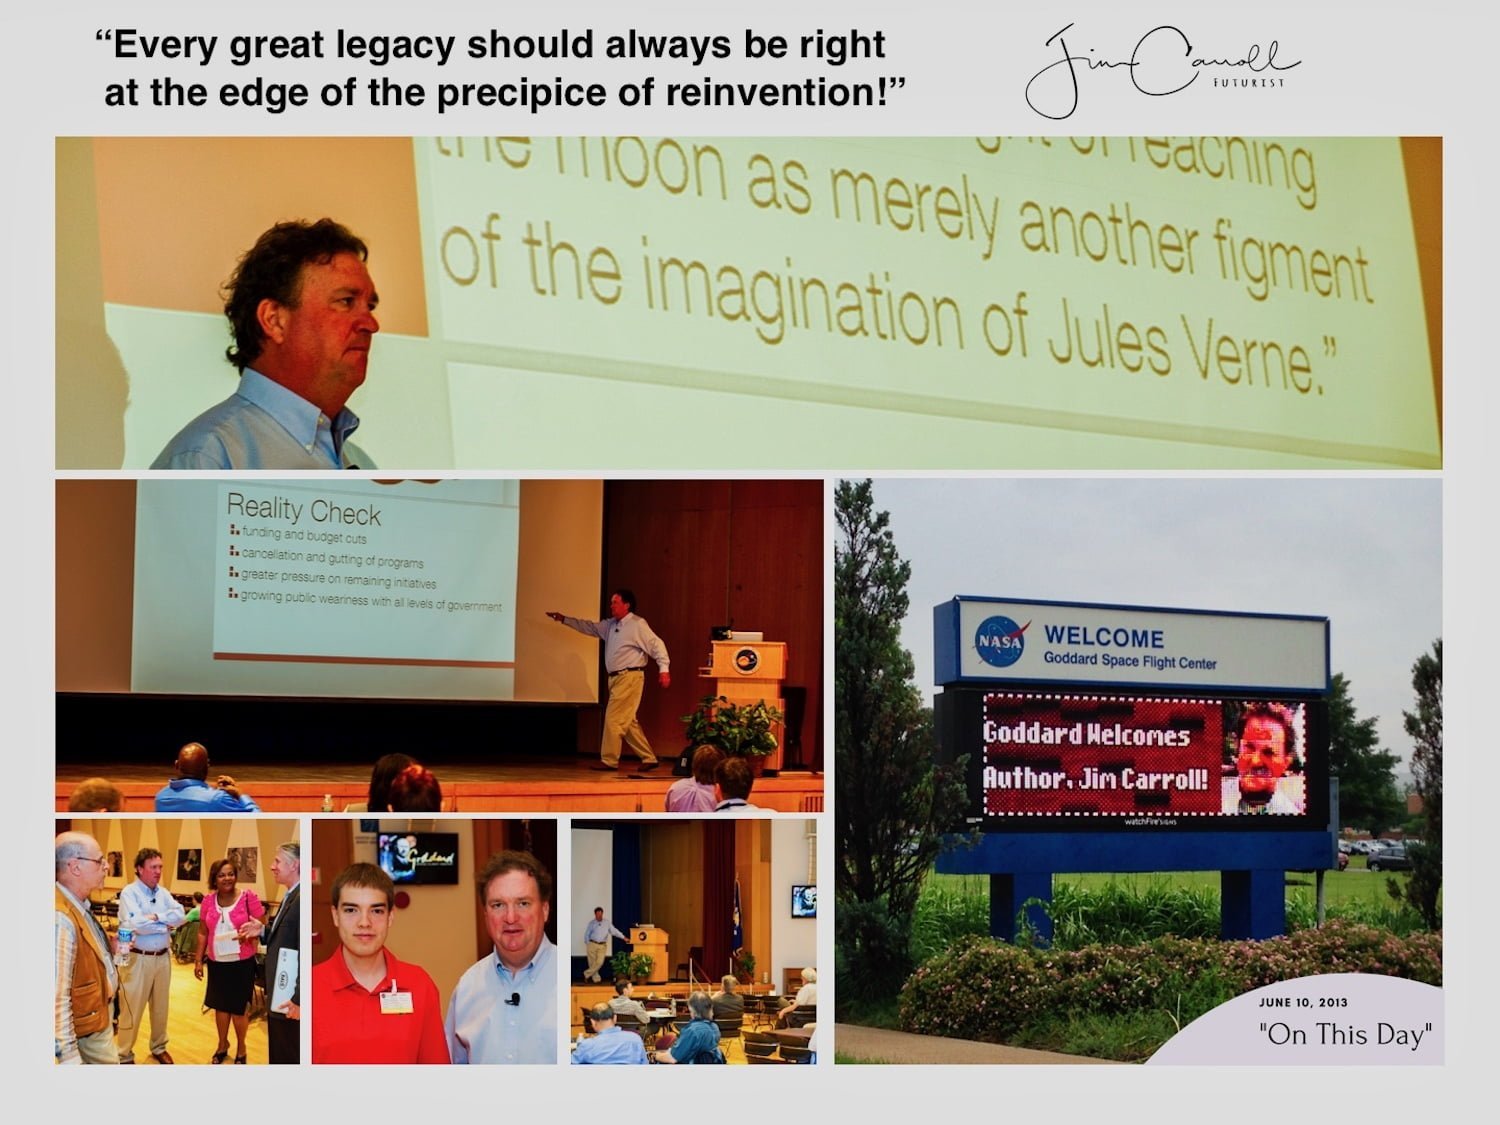 Daily Inspiration:  “Every great legacy should always be right at the edge of the precipice of reinvention!”